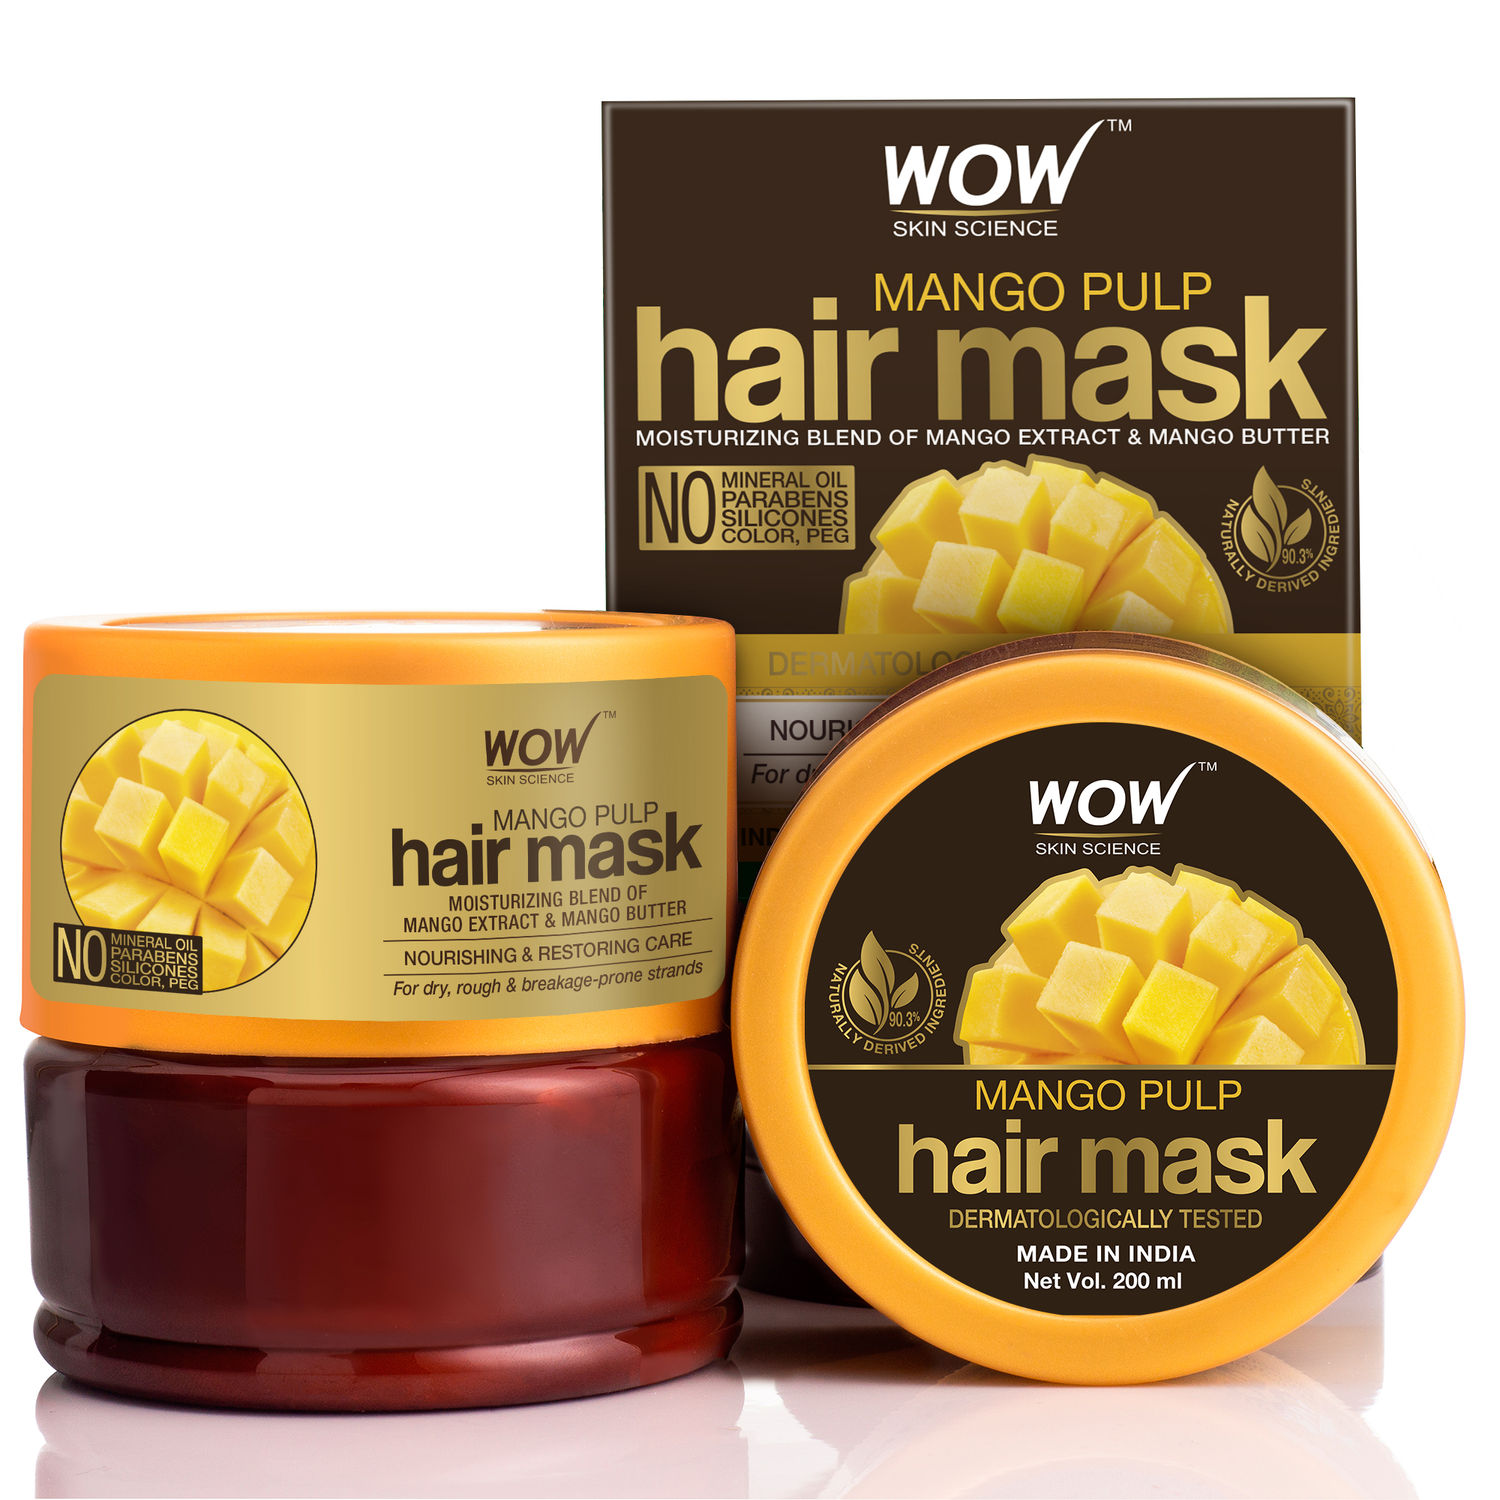 Buy WOW Skin Science Mango Hair Mask - No Mineral Oil, Parabens, Silicones(200 ml) - Purplle